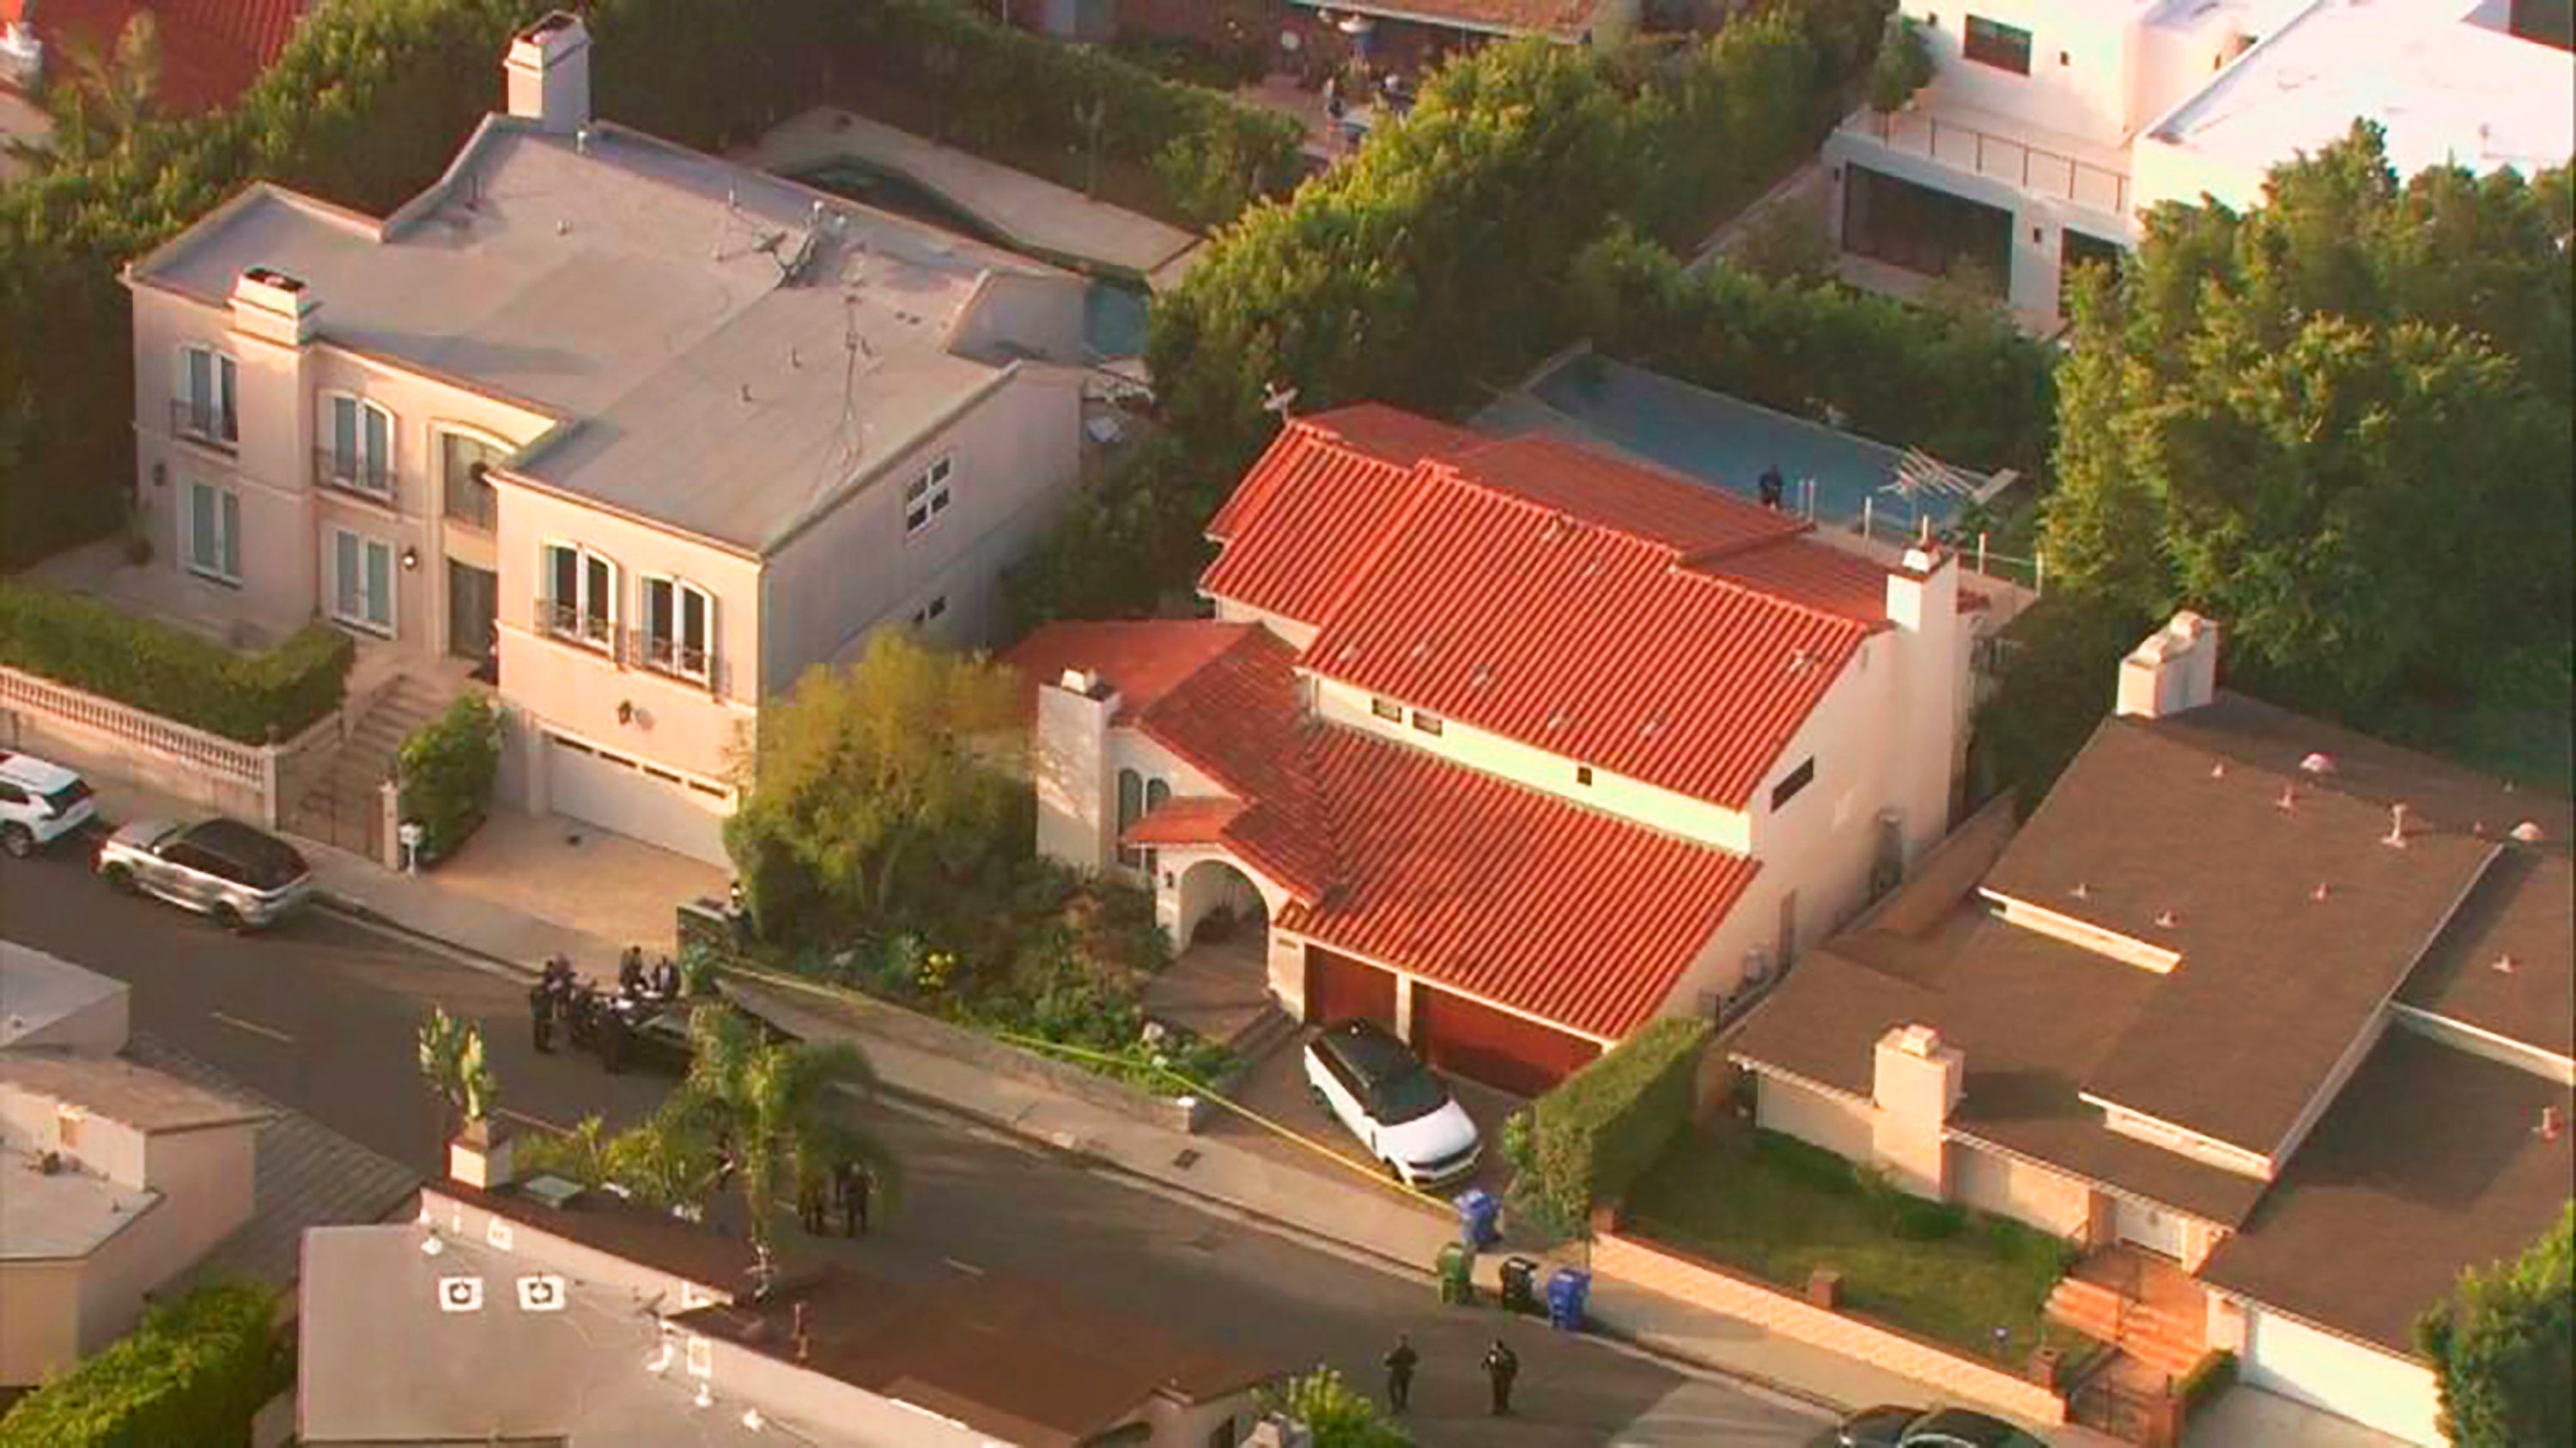 File - In this Feb. 19, 2020, aerial image taken from video provided by Fox11 News KTTV-TV shows the Hollywood Hills home where rapper Pop Smoke was fatally shot